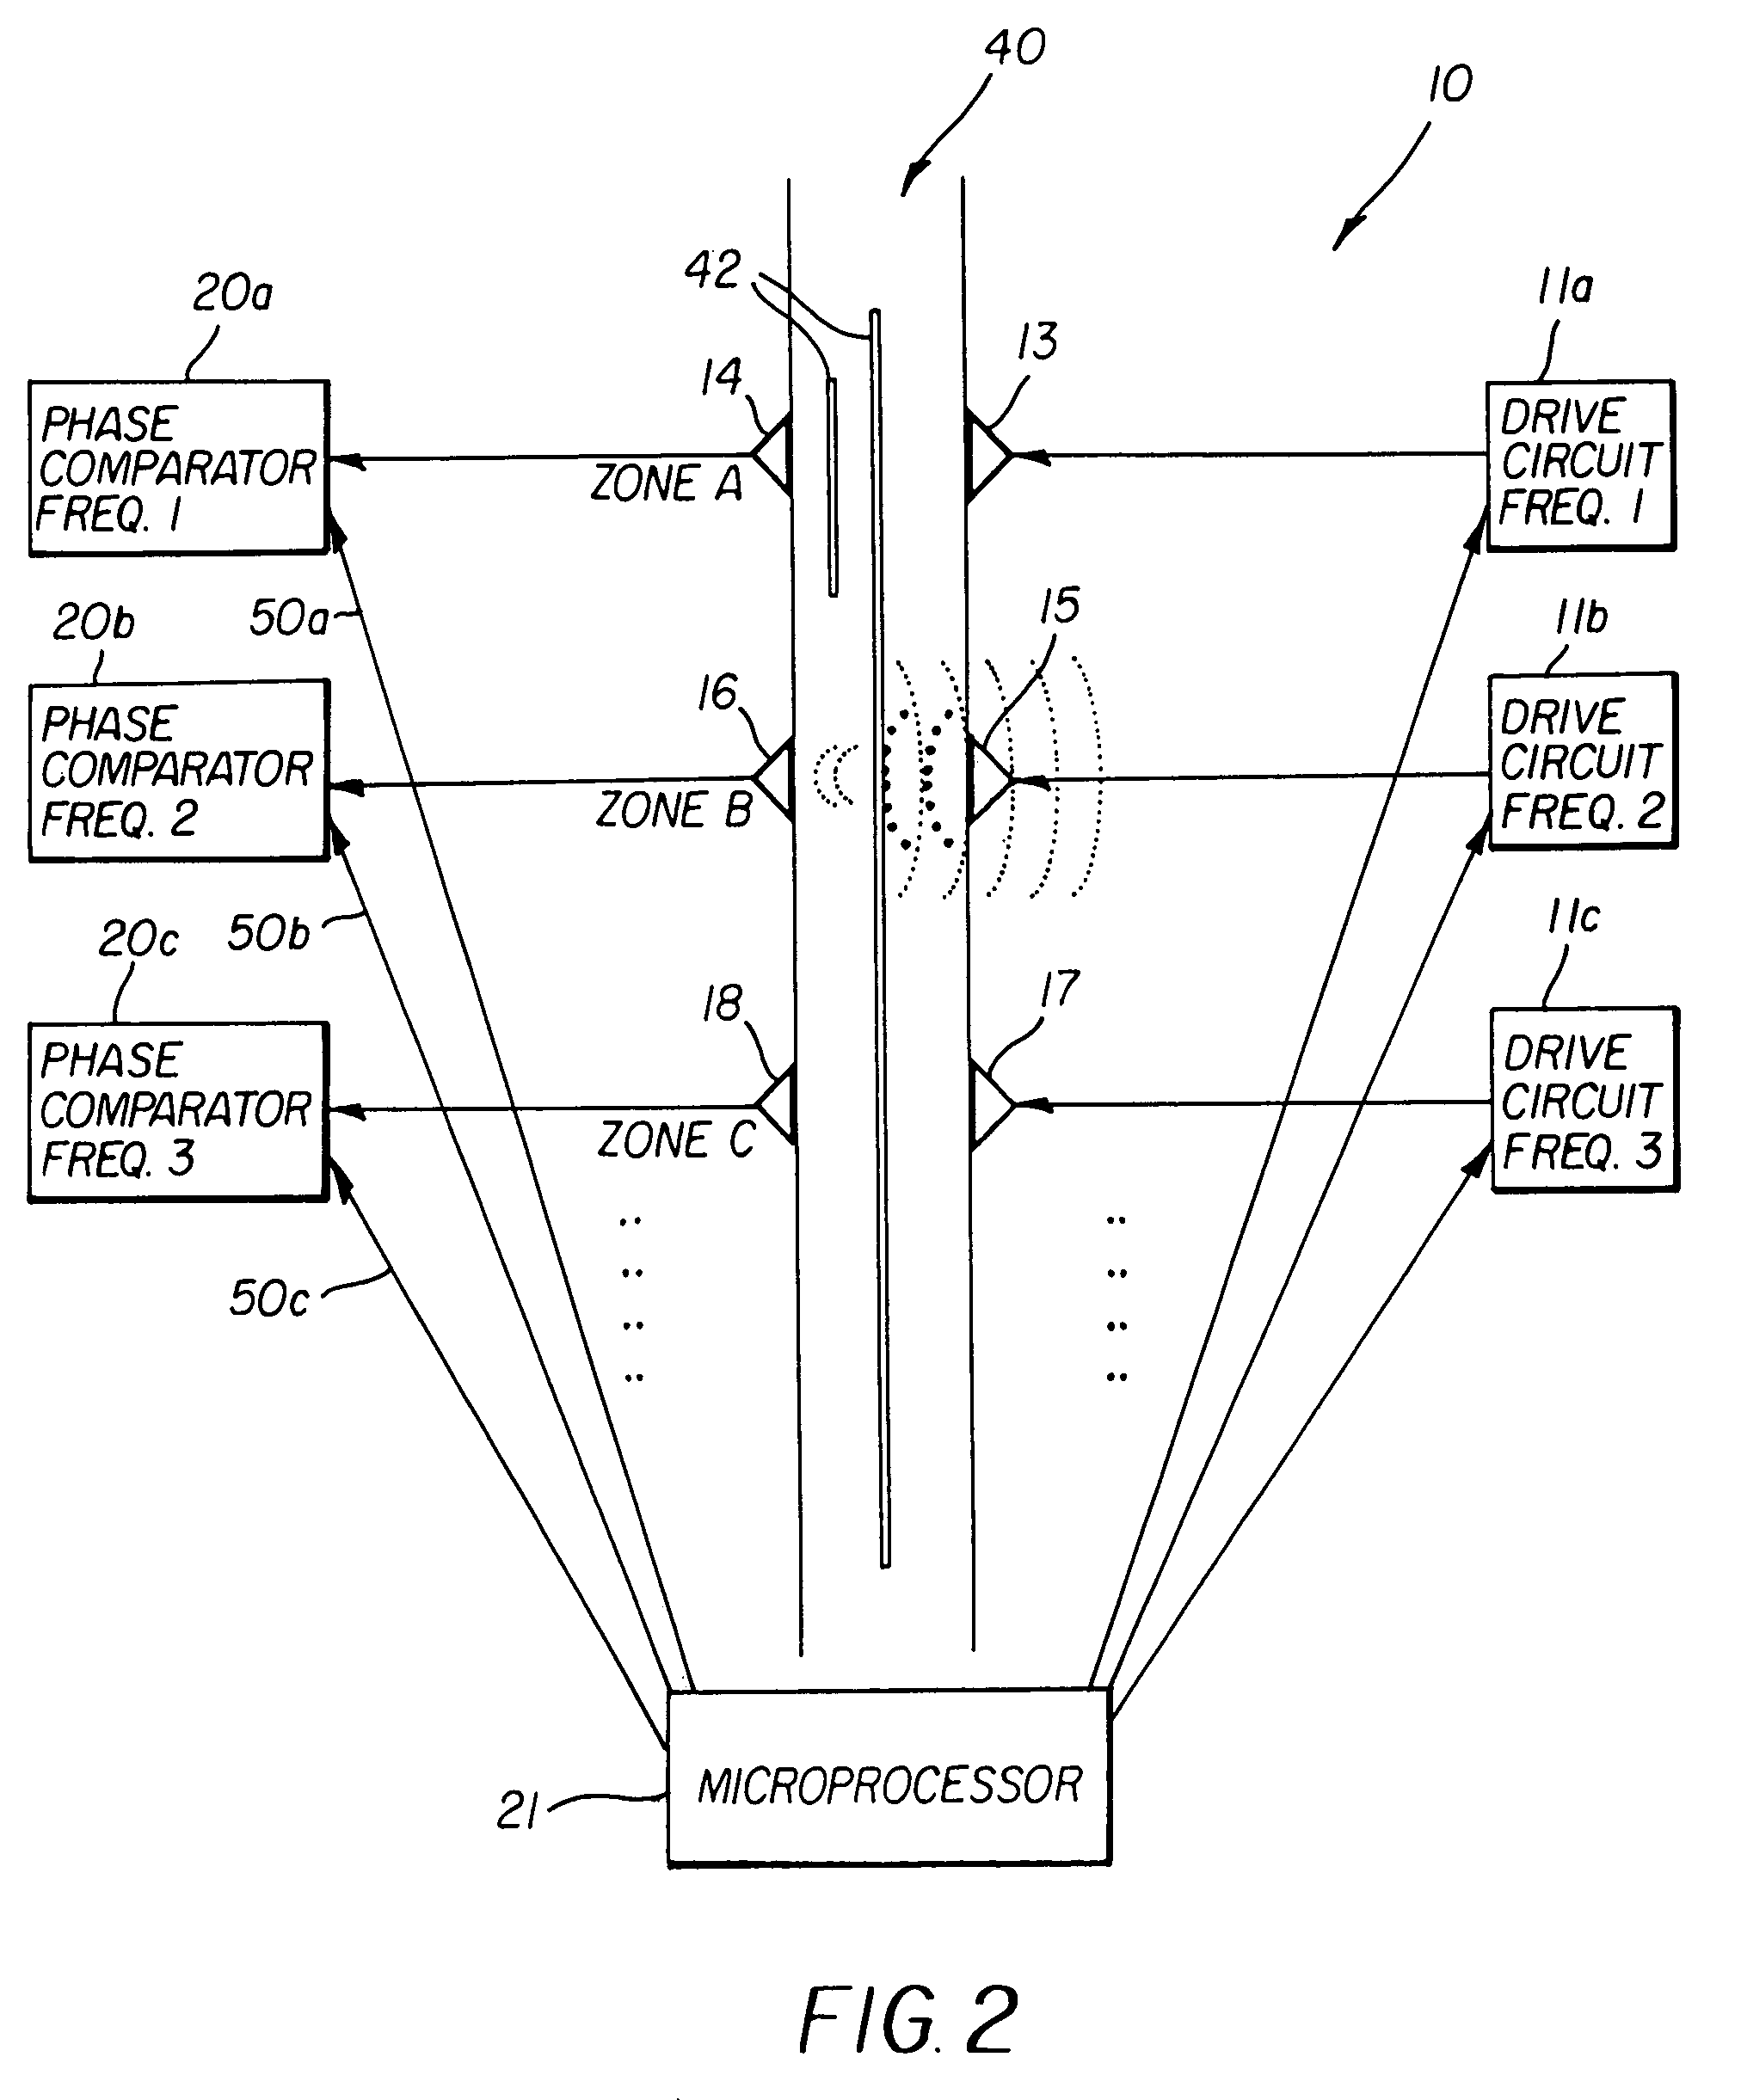 Method and apparatus for detection of multiple documents in a document scanner using multiple ultrasonic sensors